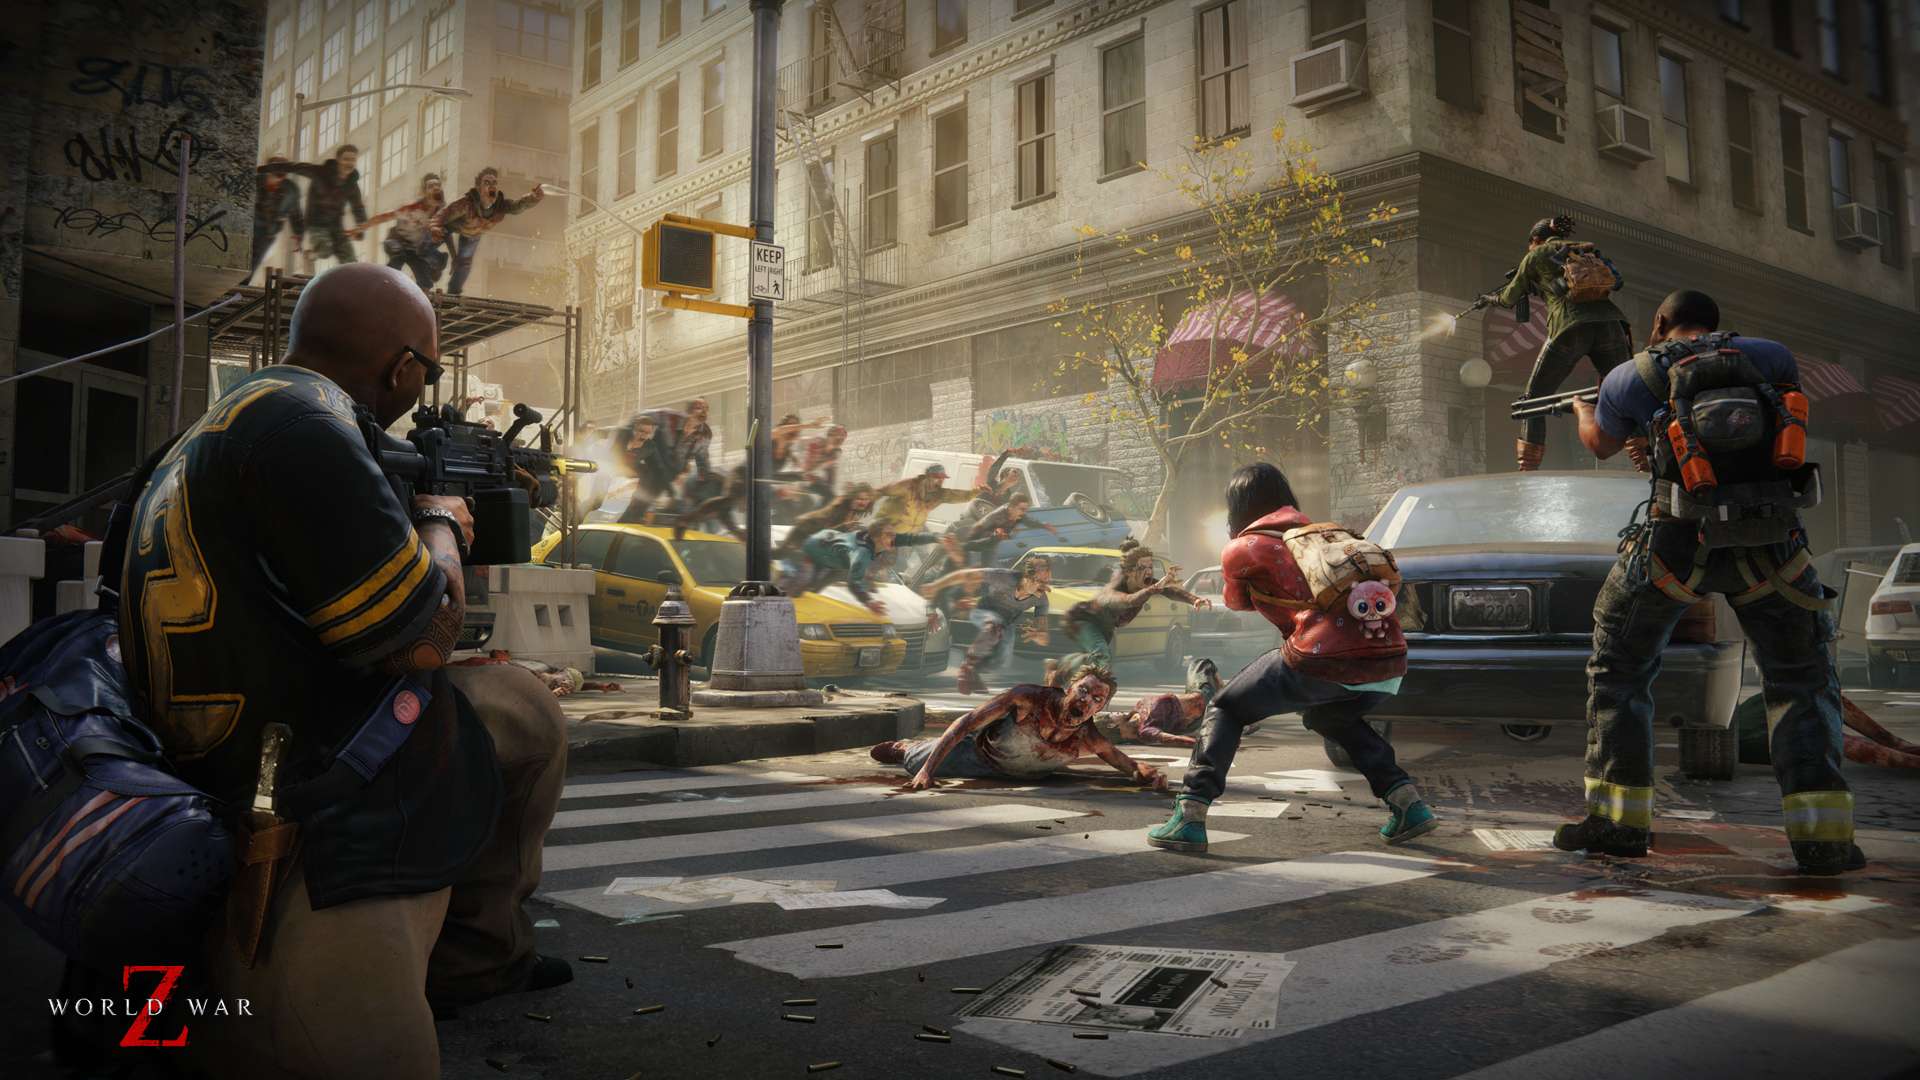 World War Z Sold Over 250,000 Copies After Going Exclusive On Epic Store